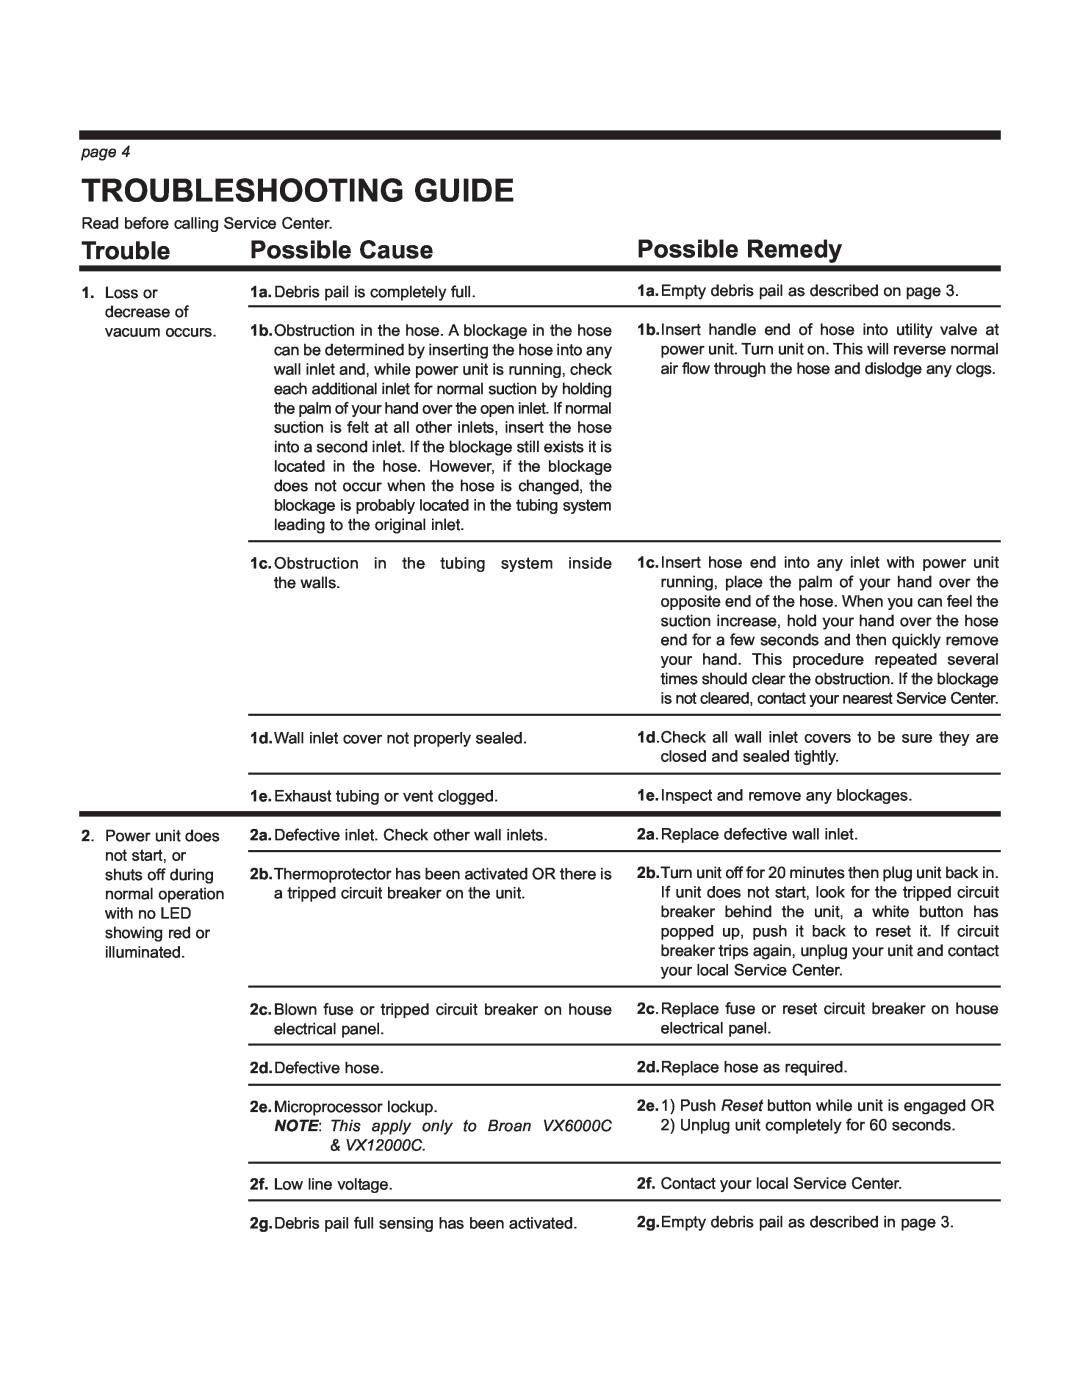 Broan VX12000C manual Troubleshooting Guide, Possible Cause, Possible Remedy, 1a.Debris pail is completely full, page 